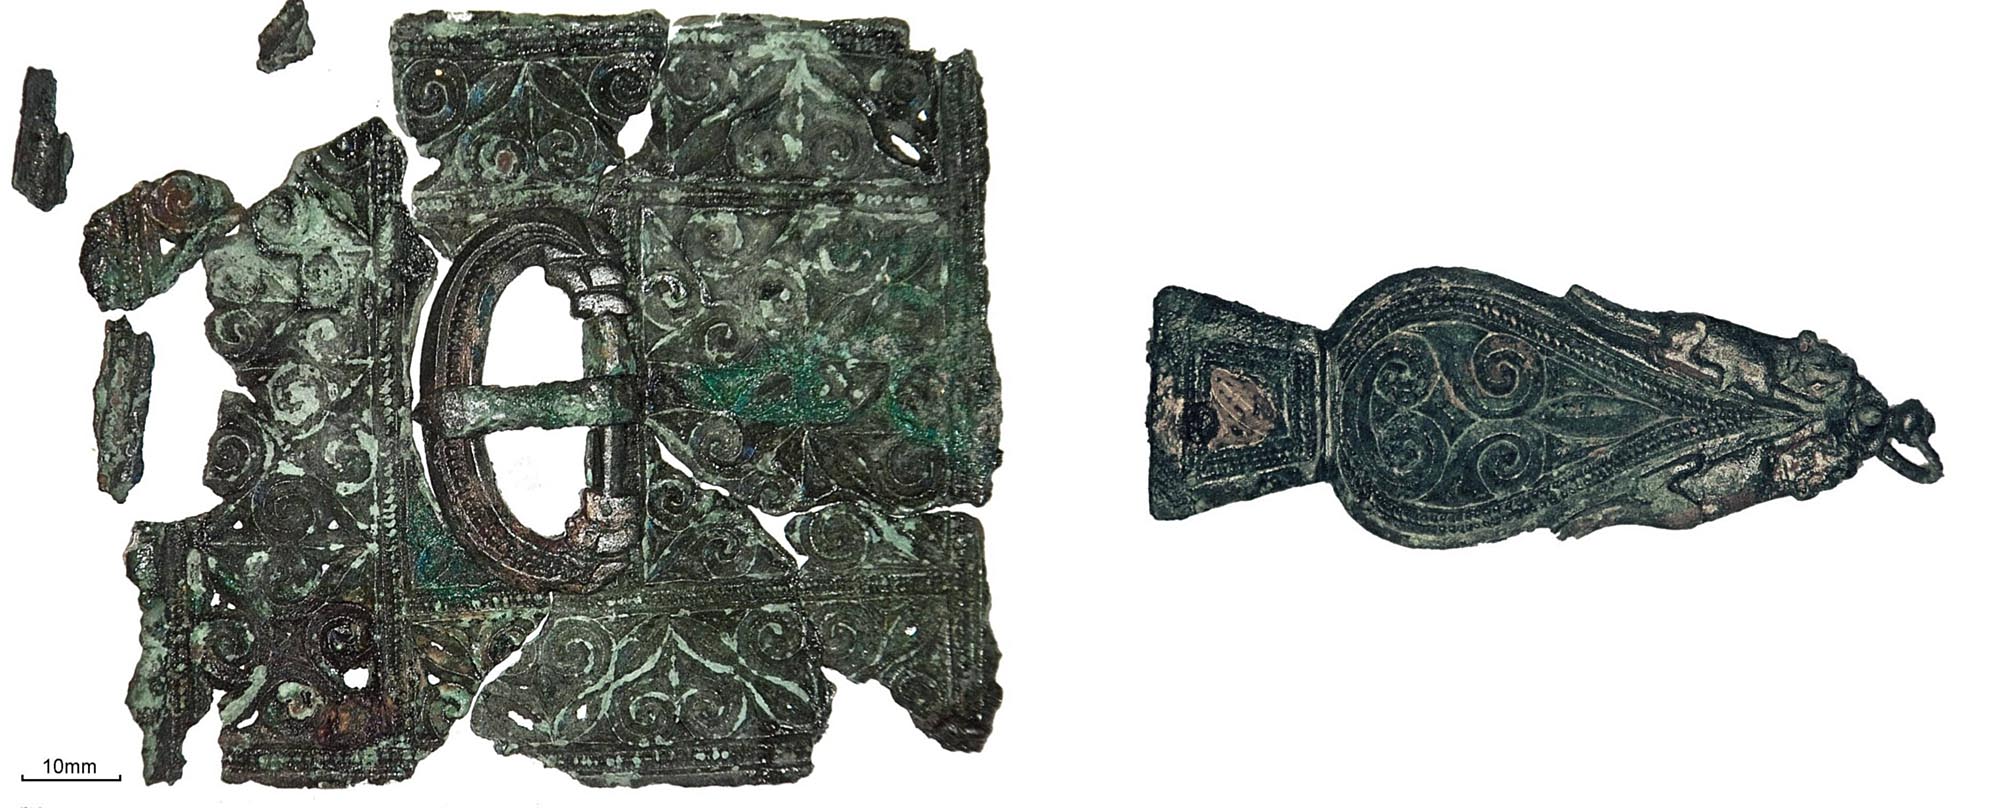 A late Roman belt set, comprising a belt buckle, belt plate and strap end, found in a grave of a late 4th century Roman soldier or civil servant. Found near Western Road, Leicester - University of Leicester Archaeological Services